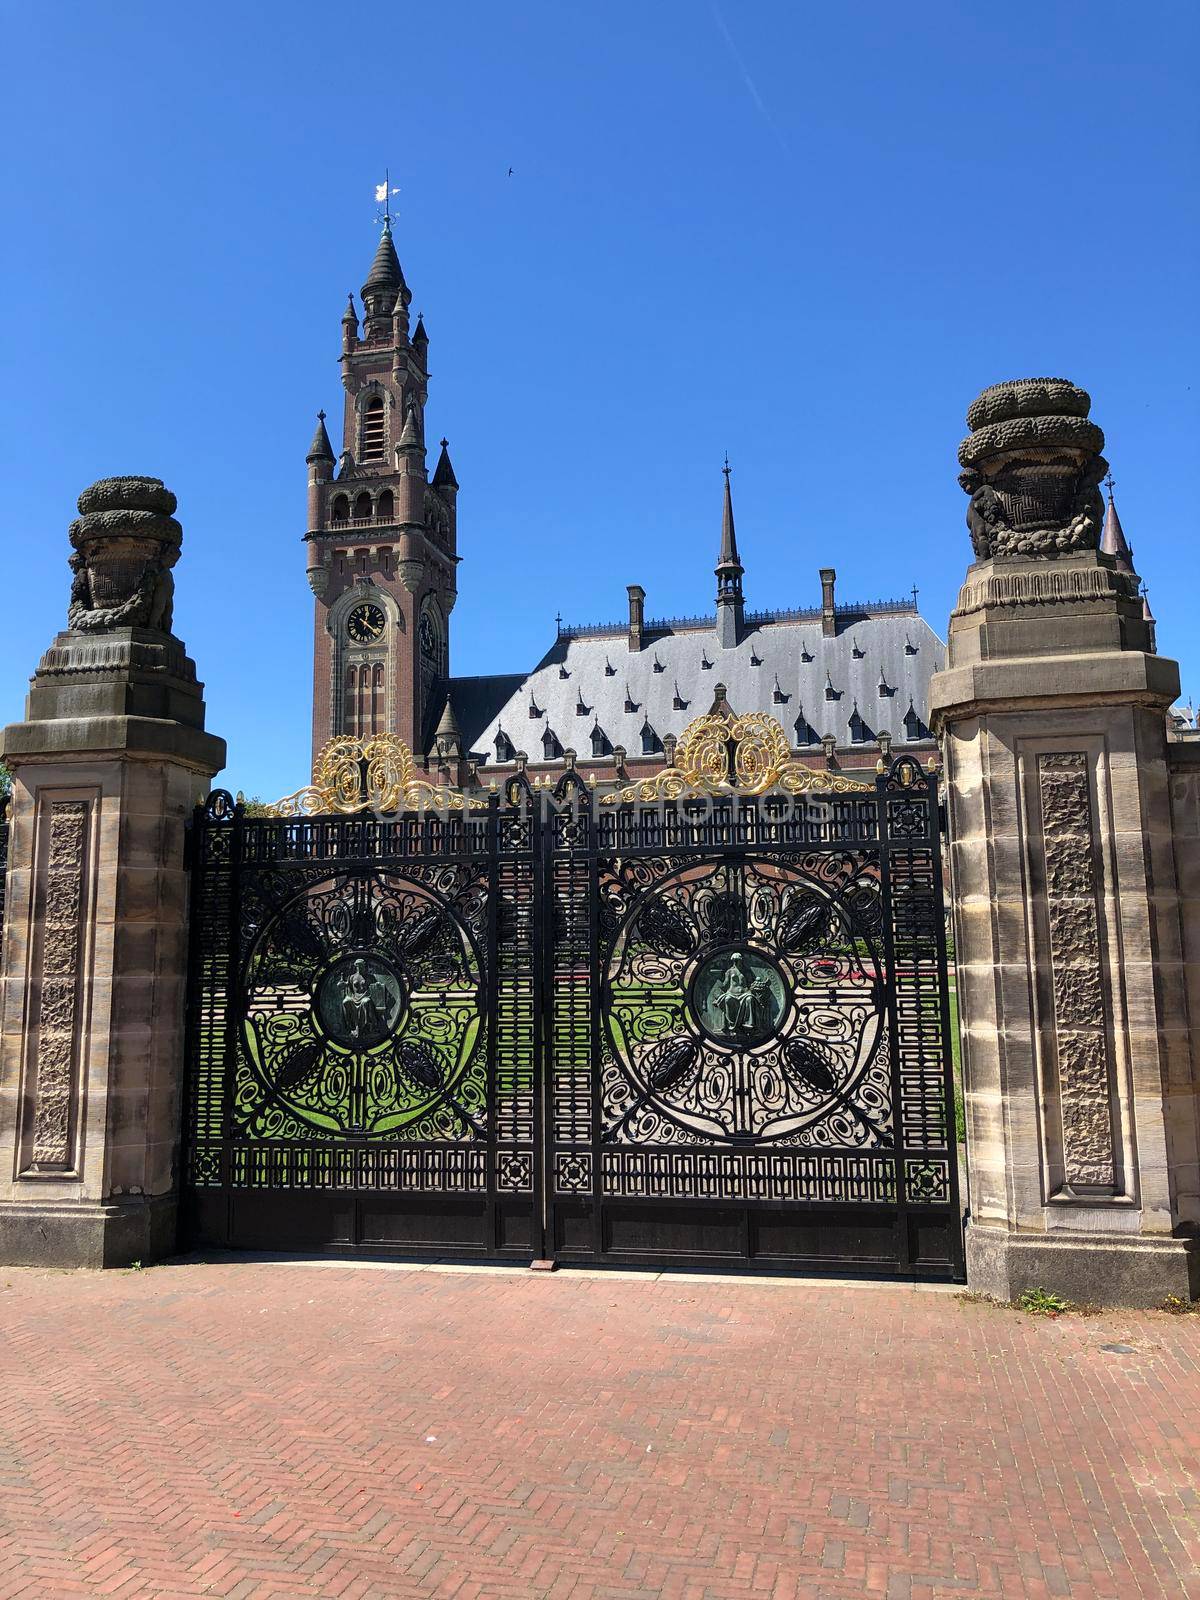 The Peace Palace an international law administrative building in The Hague, the Netherlands